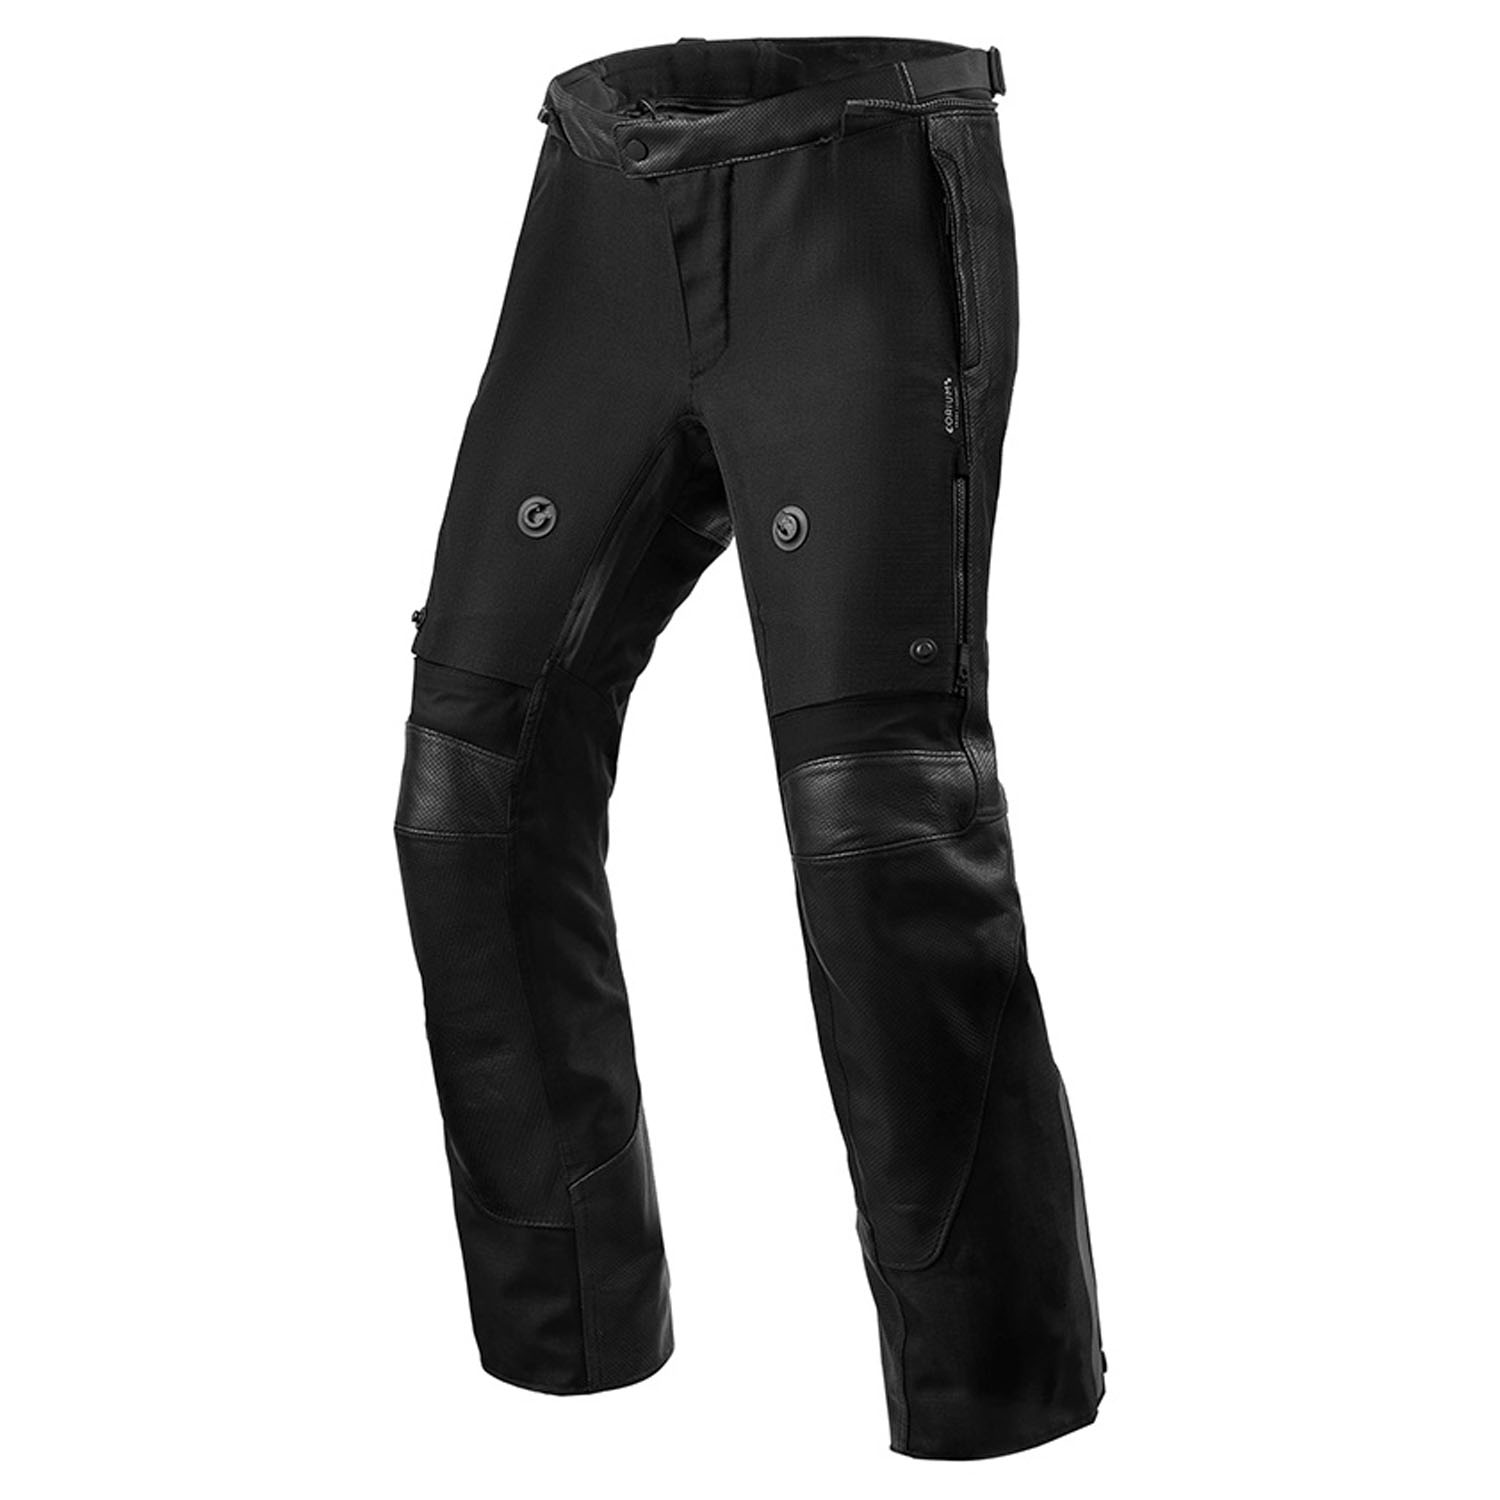 Image of REV'IT! Trousers Valve H2O Black Short Motorcycle Pants Taille 54